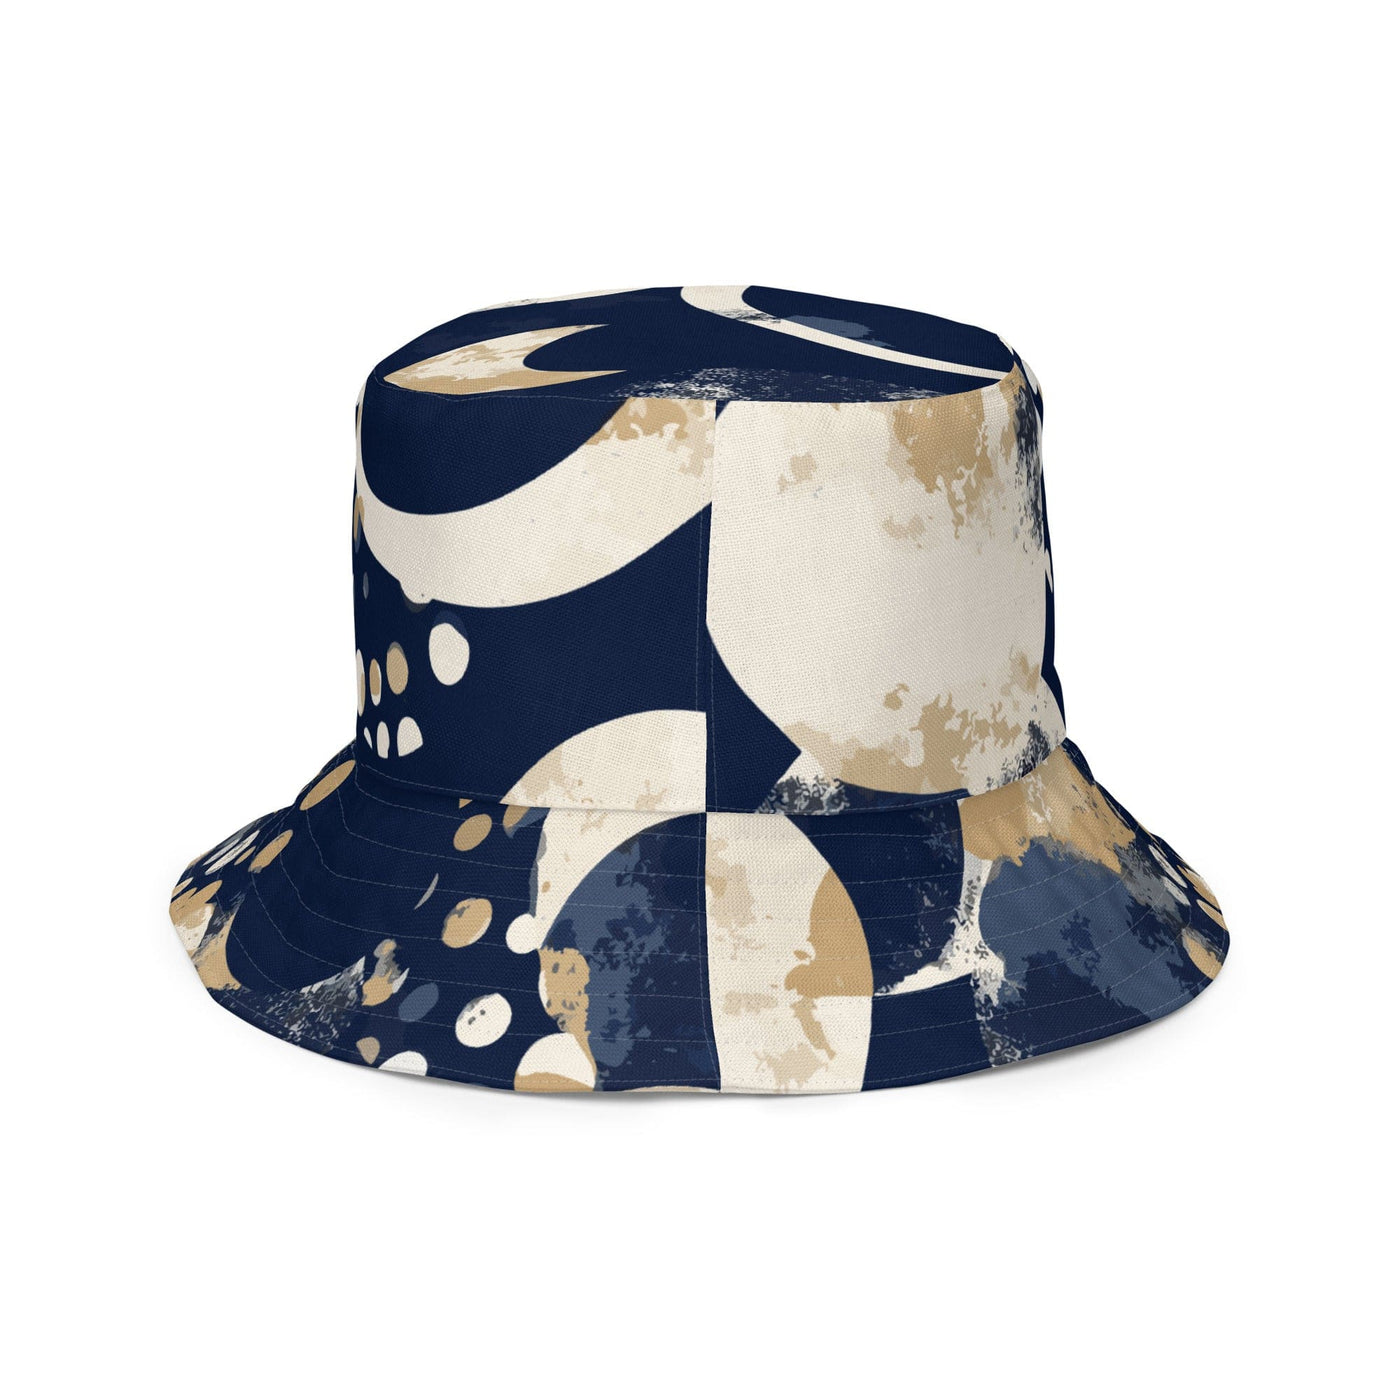 Reversible Bucket Hat Navy Blue And Beige Spotted Illustration